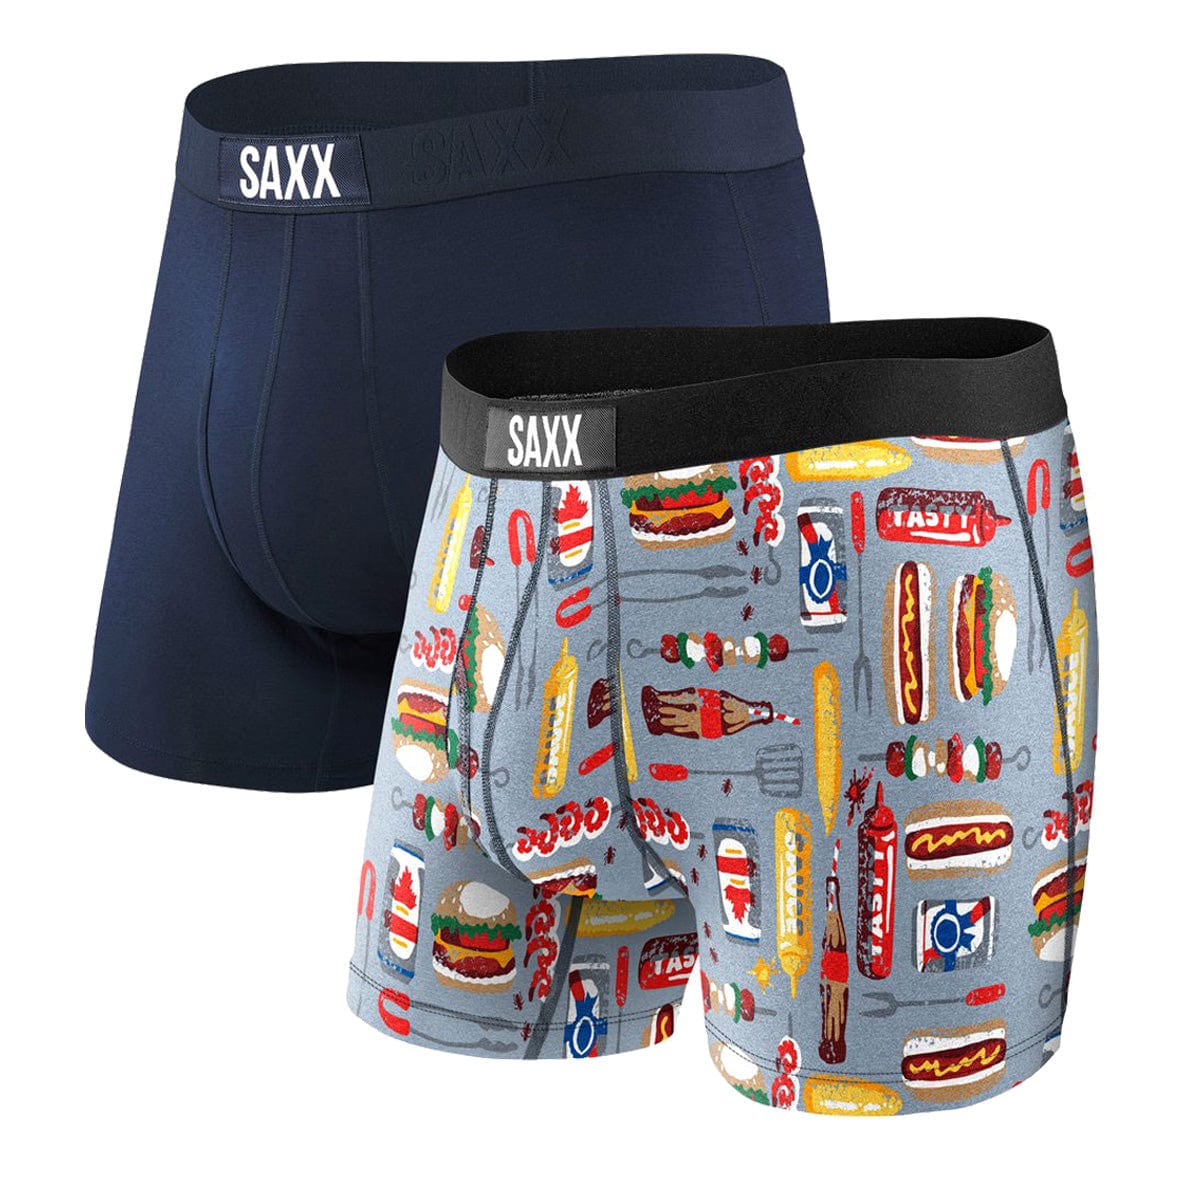 Saxx Ultra Boxers - Back Yard BBQ / Navy (2 Pack) - The Hockey Shop Source For Sports